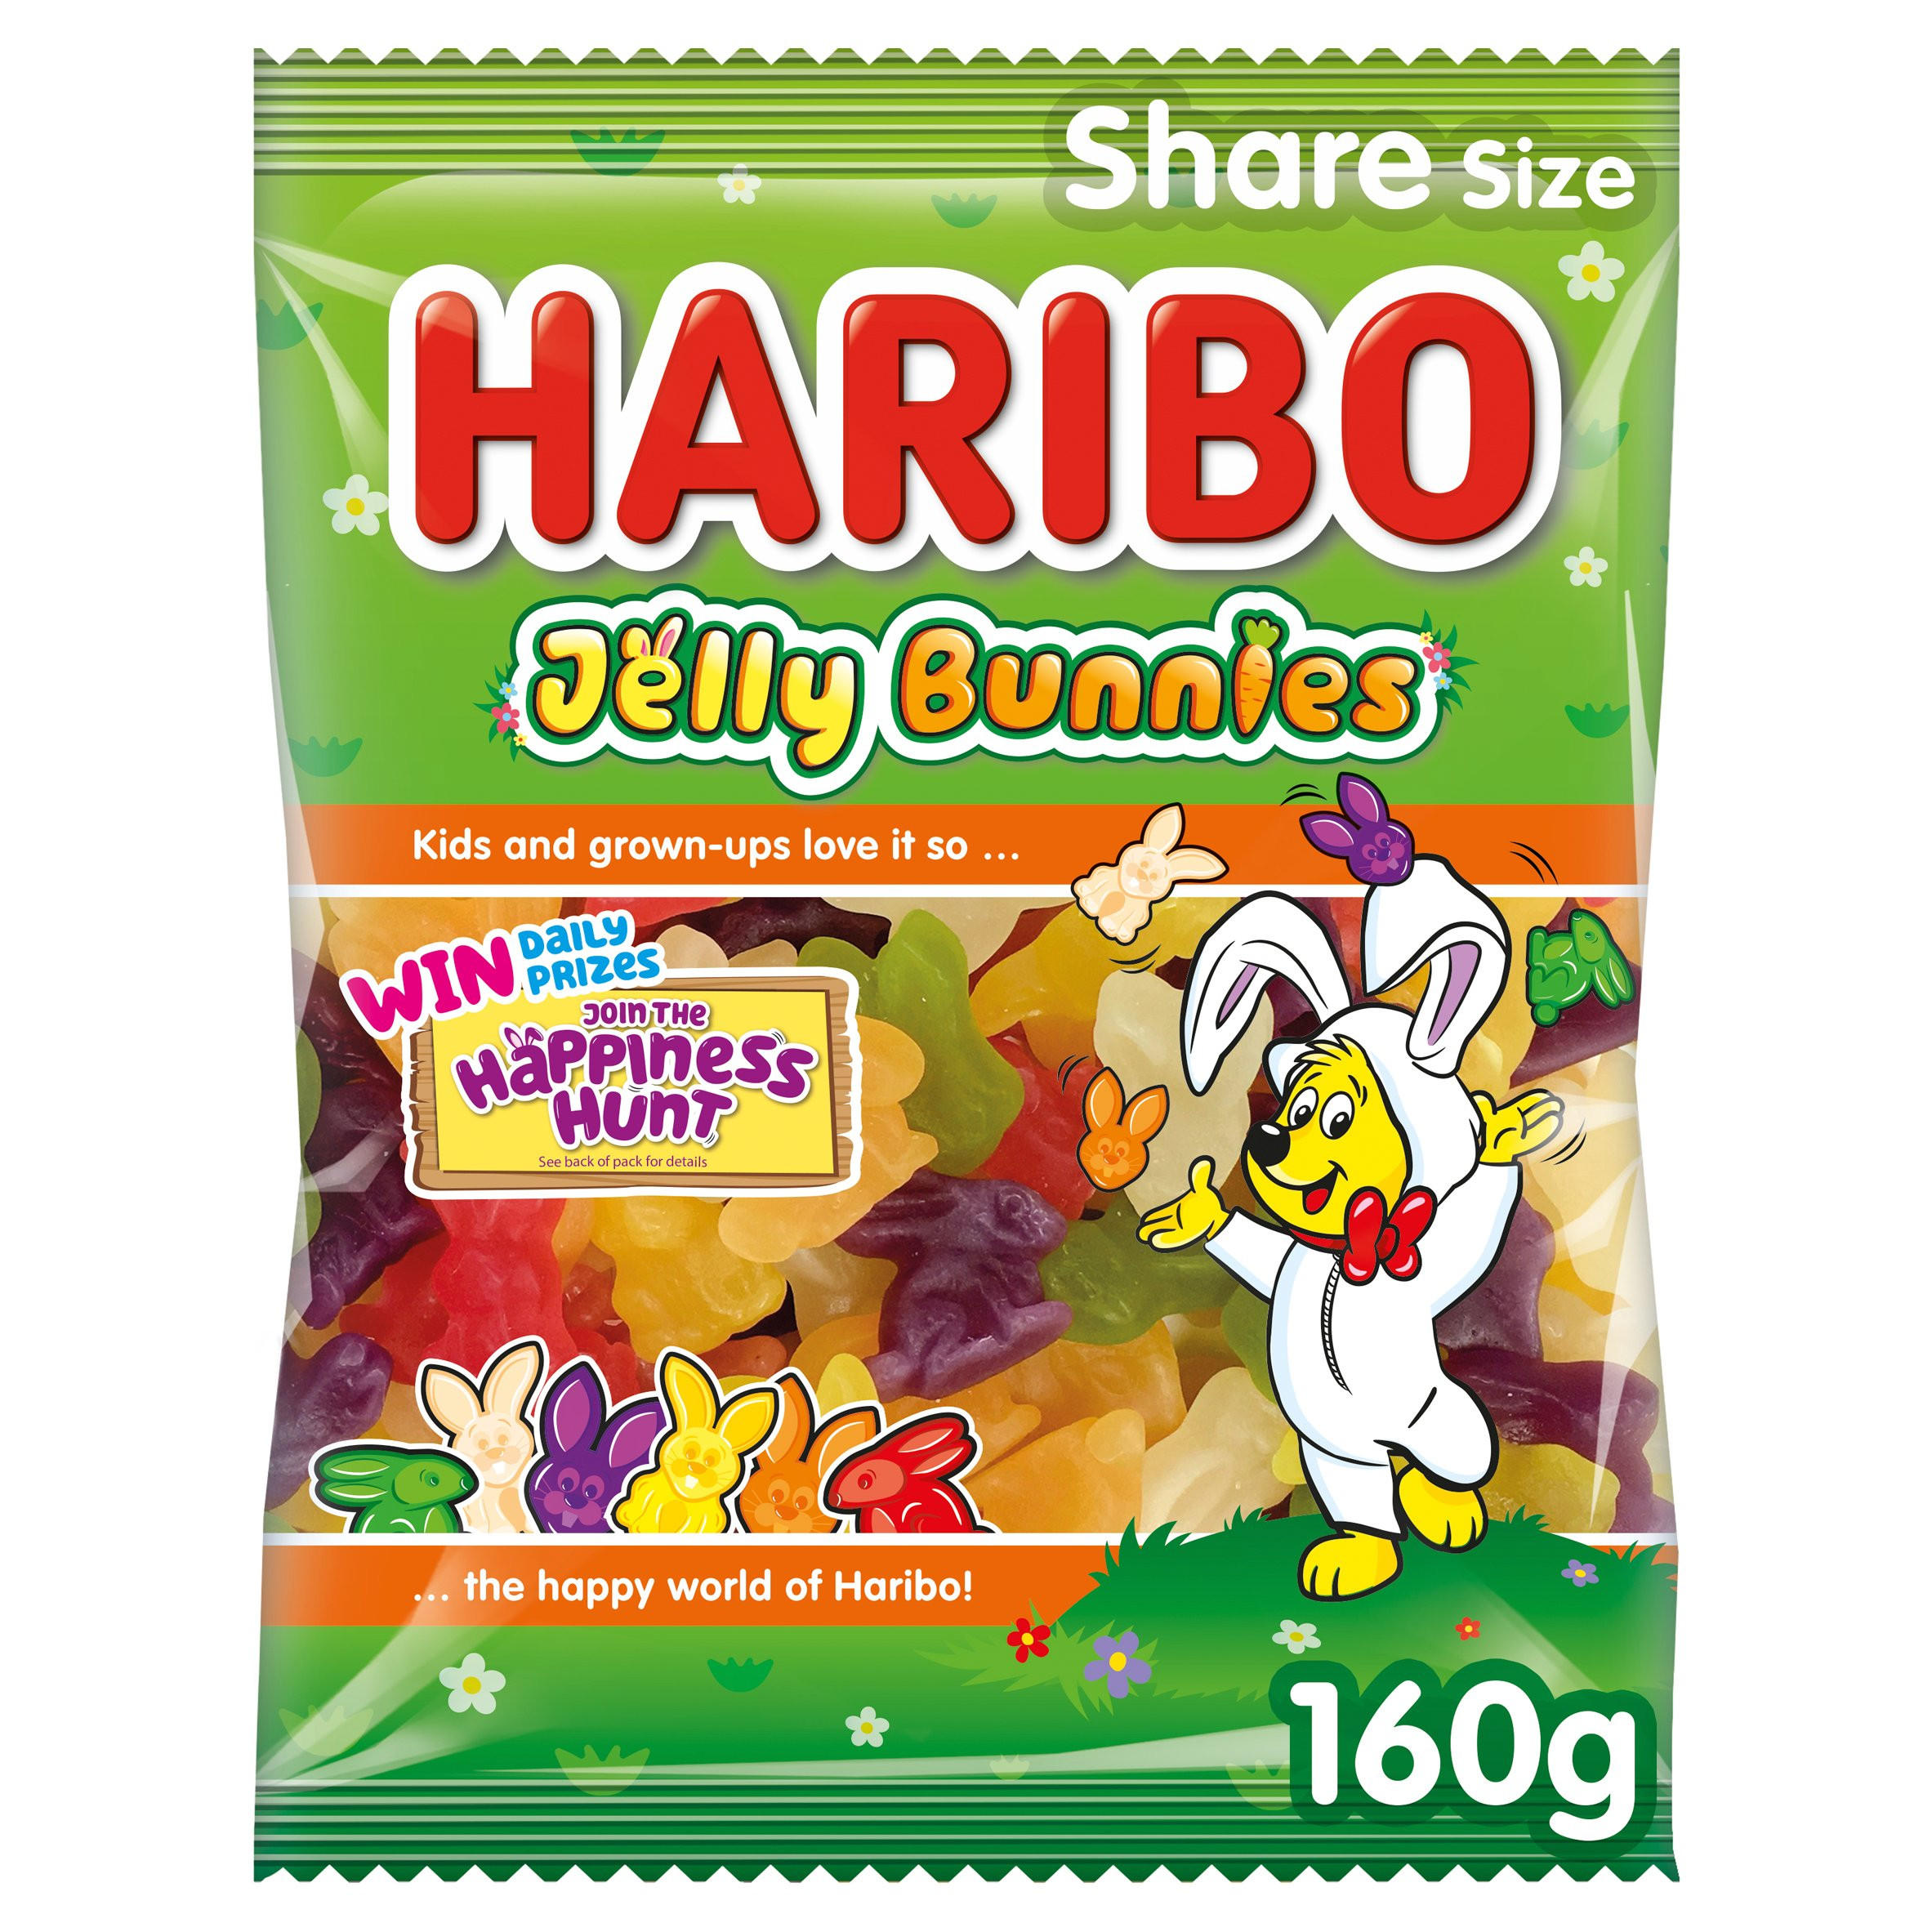 Haribo Jelly Bunnies 160g Sweets Iceland Foods